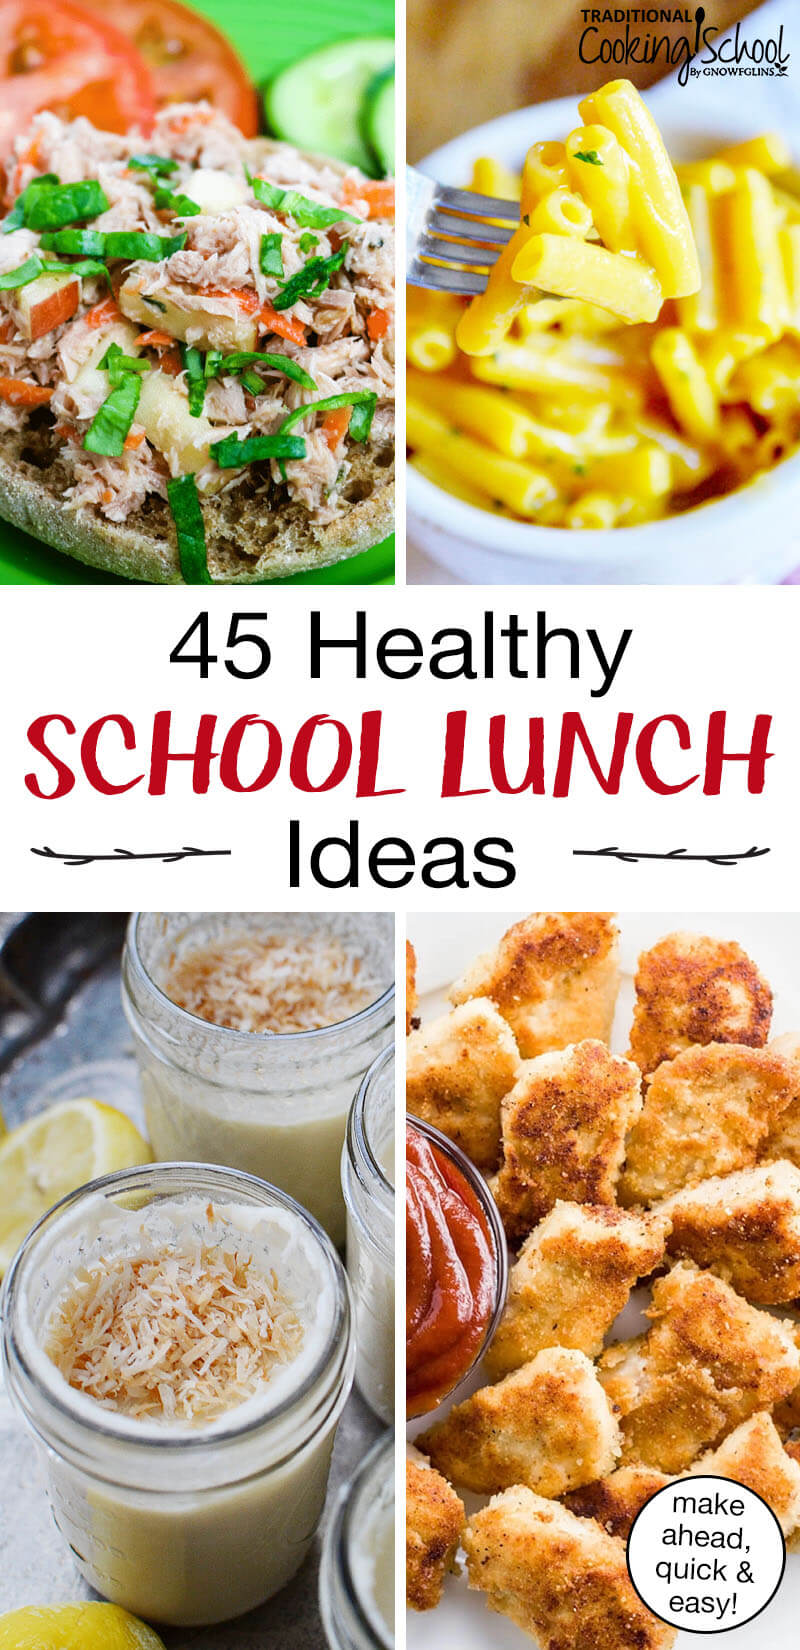 photo collage of school lunches, including lemon pudding cups and mac n' cheese, with text overlay: "45 Healthy School Lunch Ideas (make ahead, quick & easy!)"